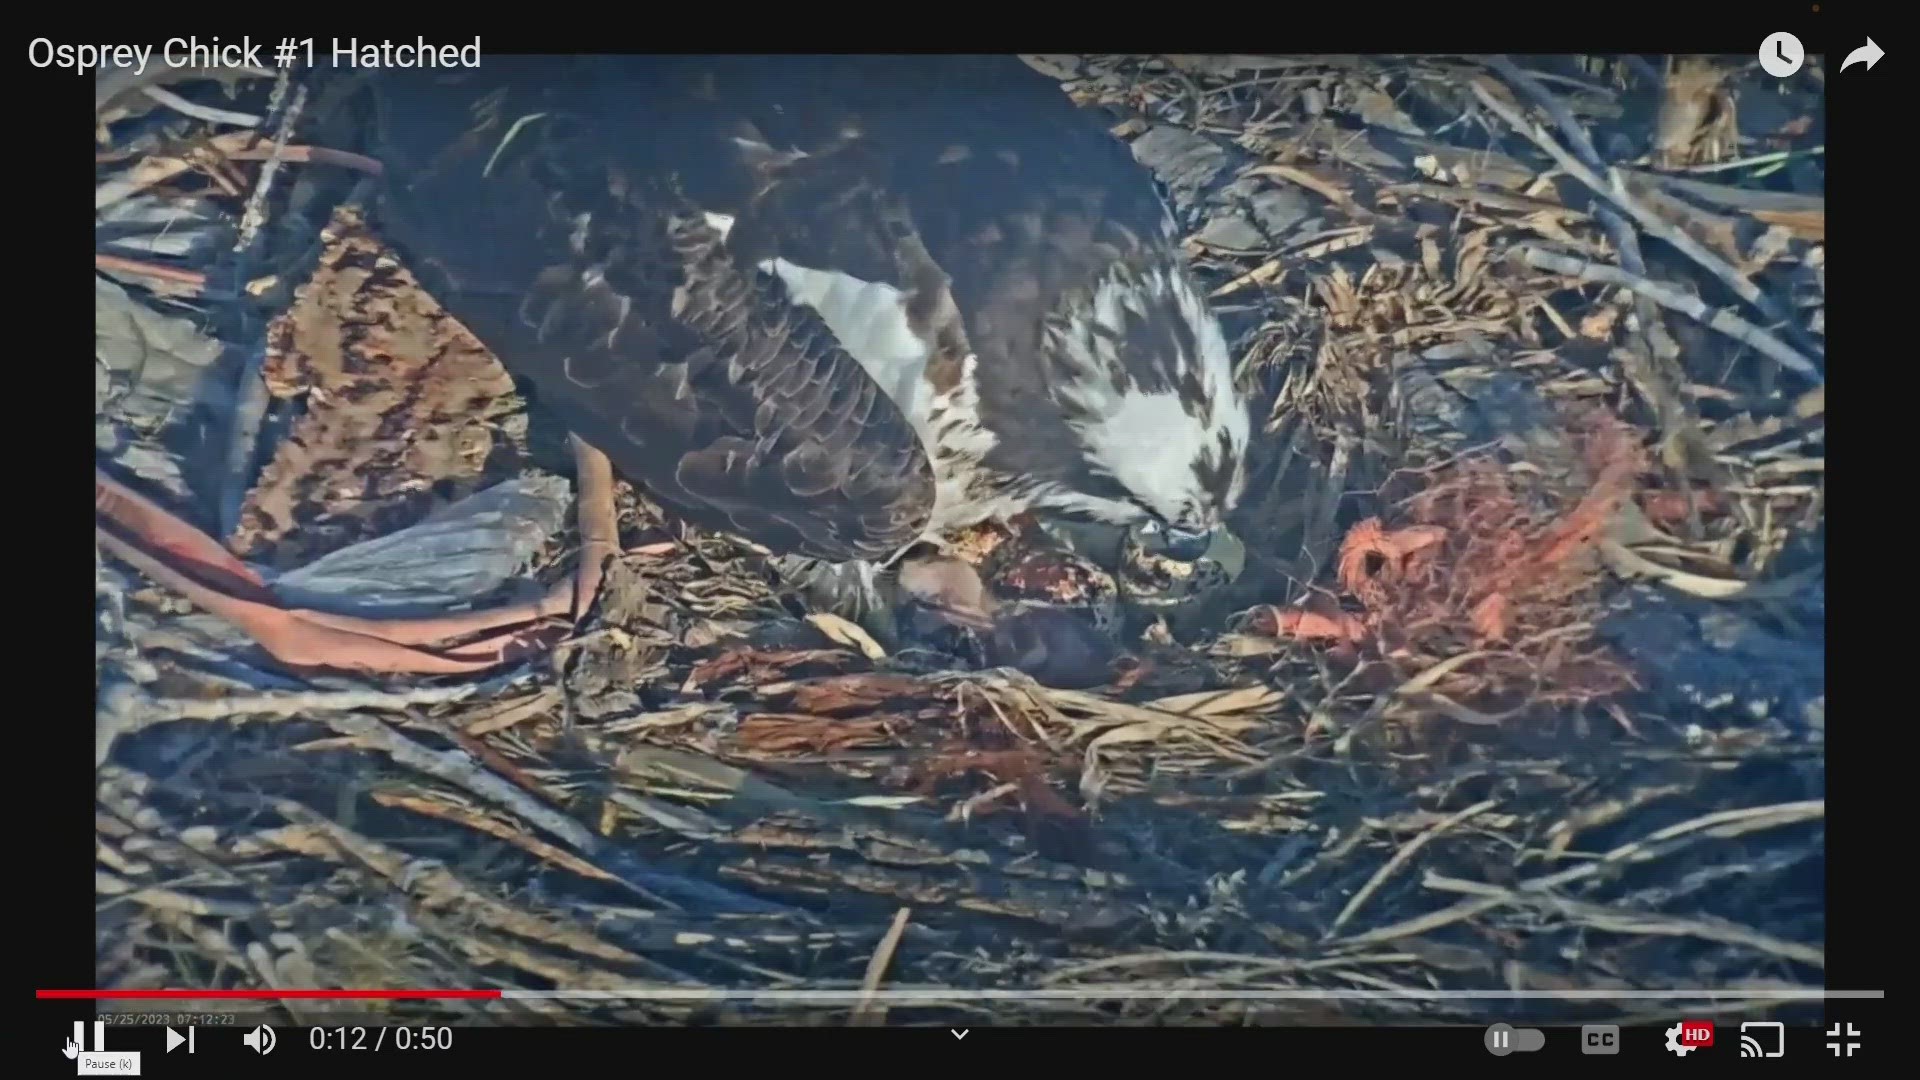 The chick hatched in the Boulder County Fairgrounds nest Thursday morning to a female osprey that was "relentless" in protecting her nest in the hail two weeks ago.